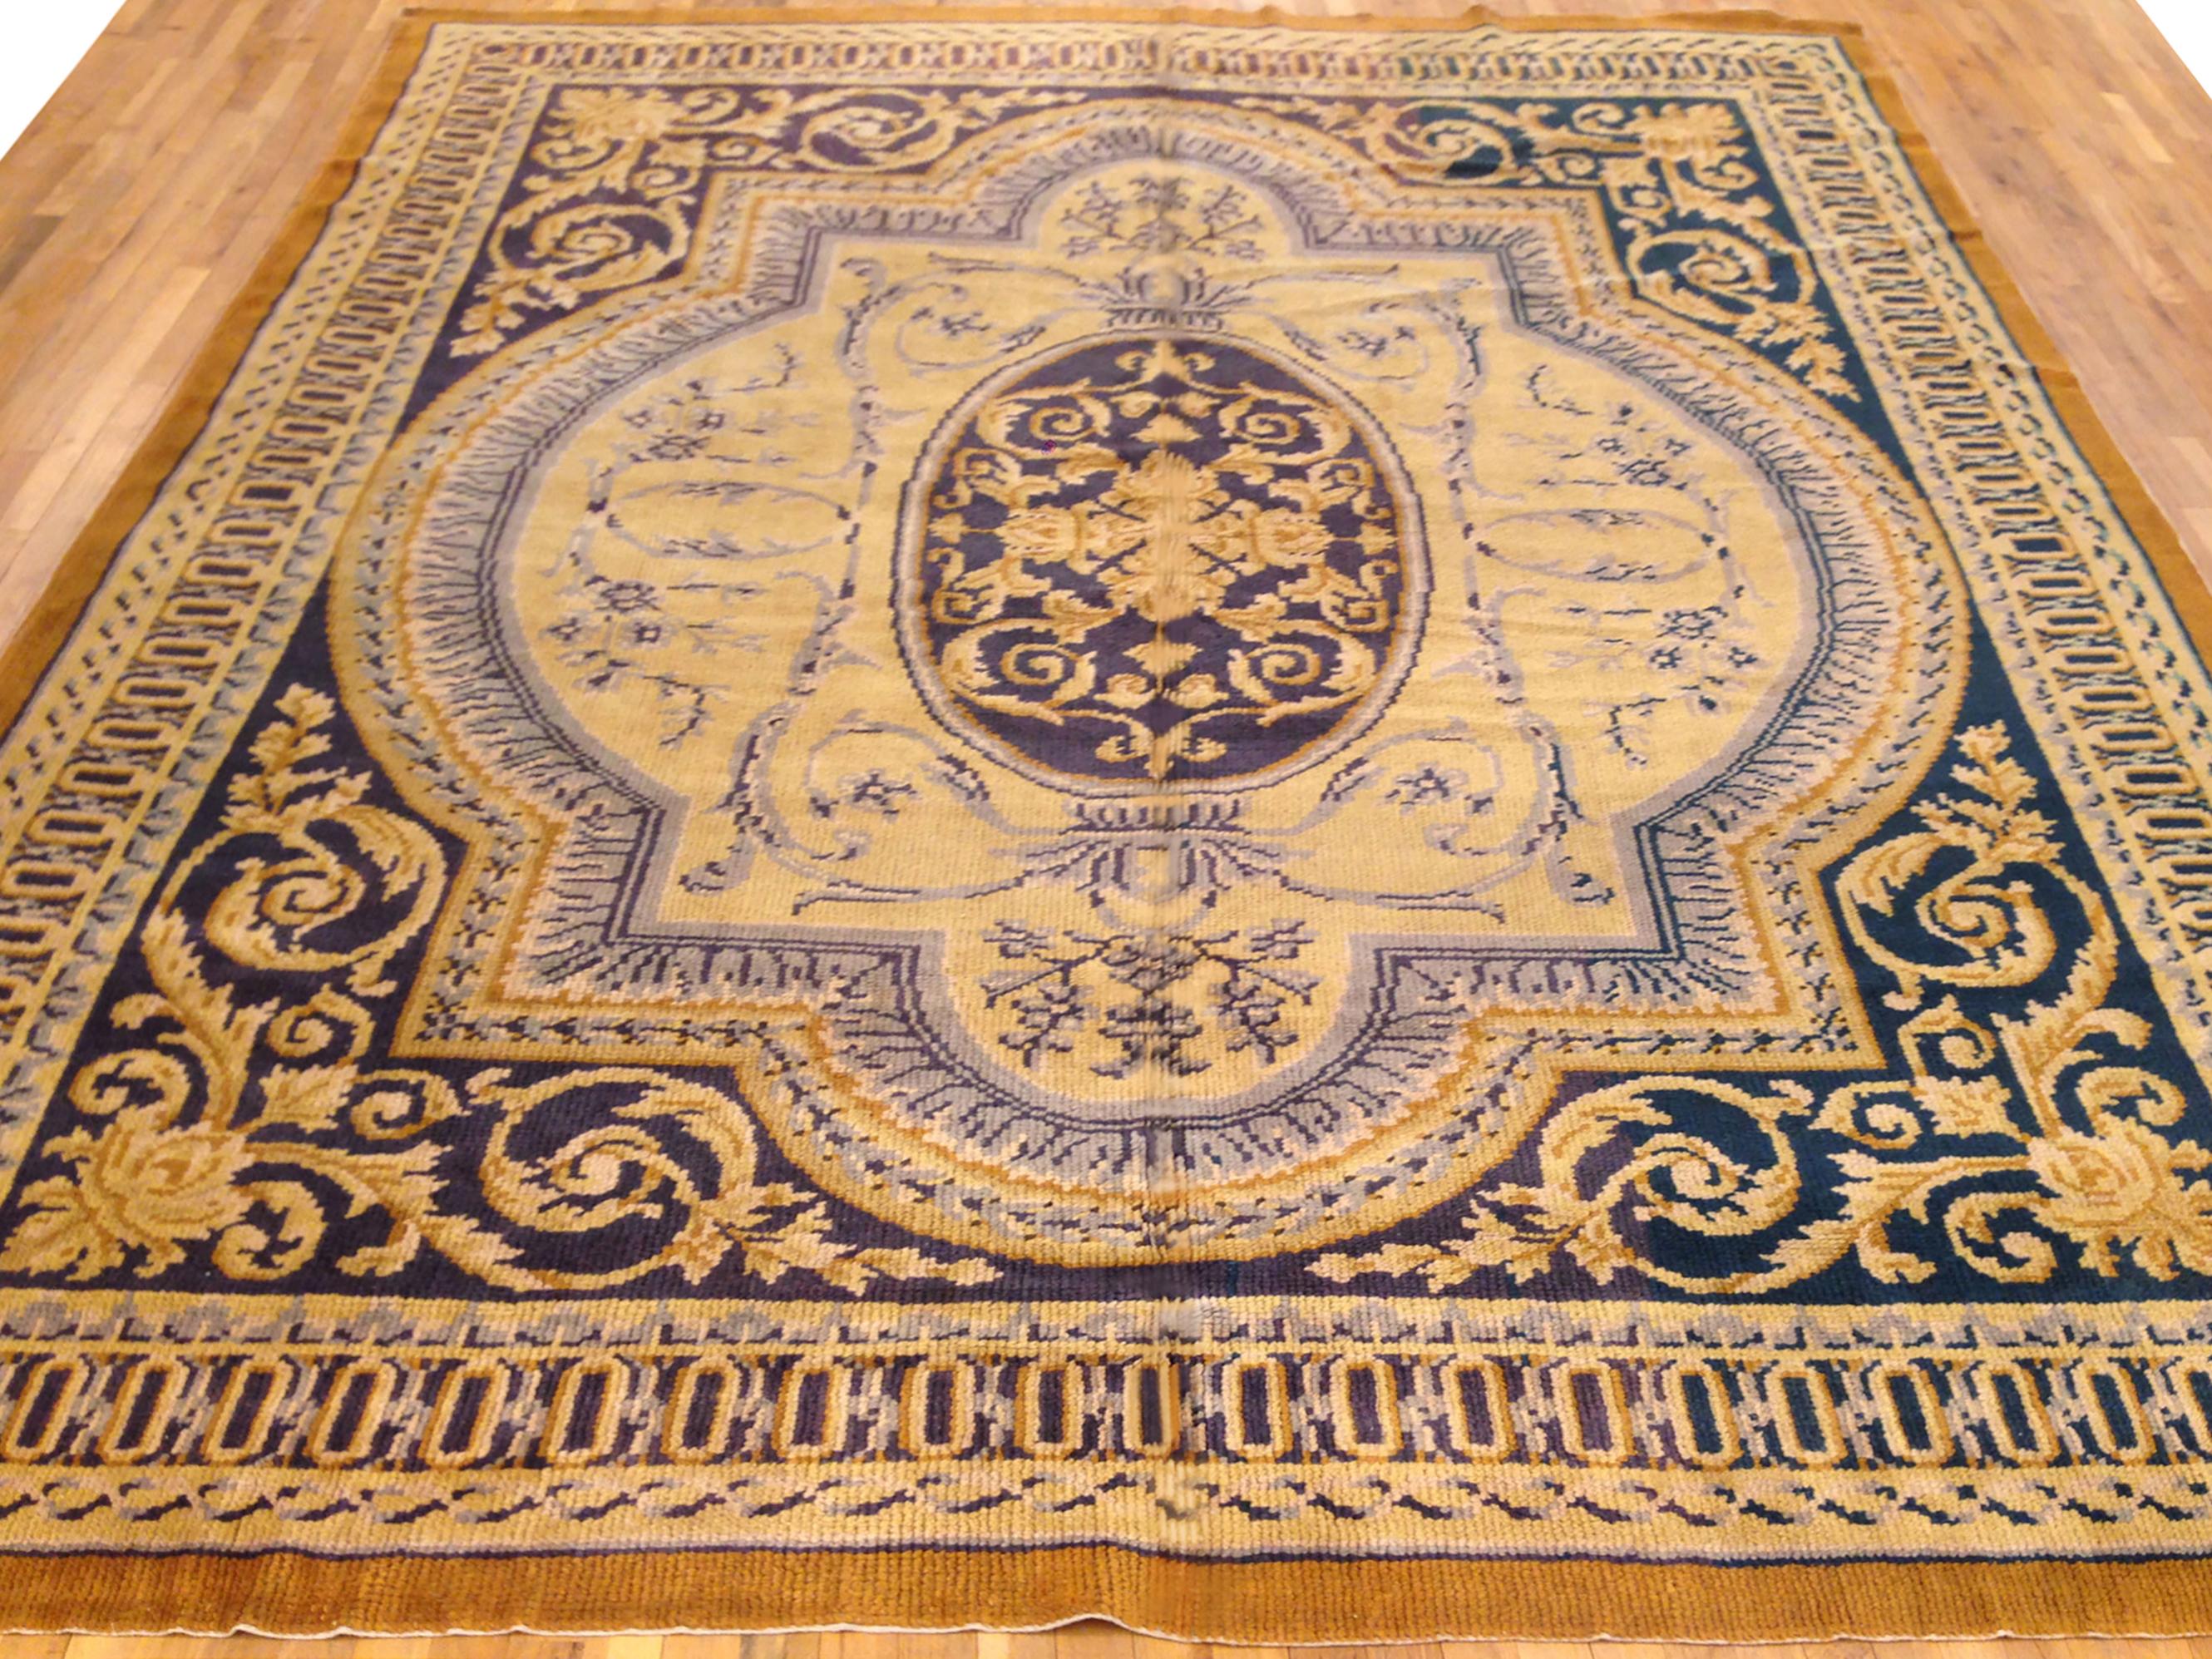 Antique Spanish Savonnerie Rug, Roome size, circa 1930

A one-of-a-kind antique European Savonnerie Oriental Carpet, hand-knotted with short wool pile. This beautiful rug features a central medallion on the ivory primary field, with lavender outer